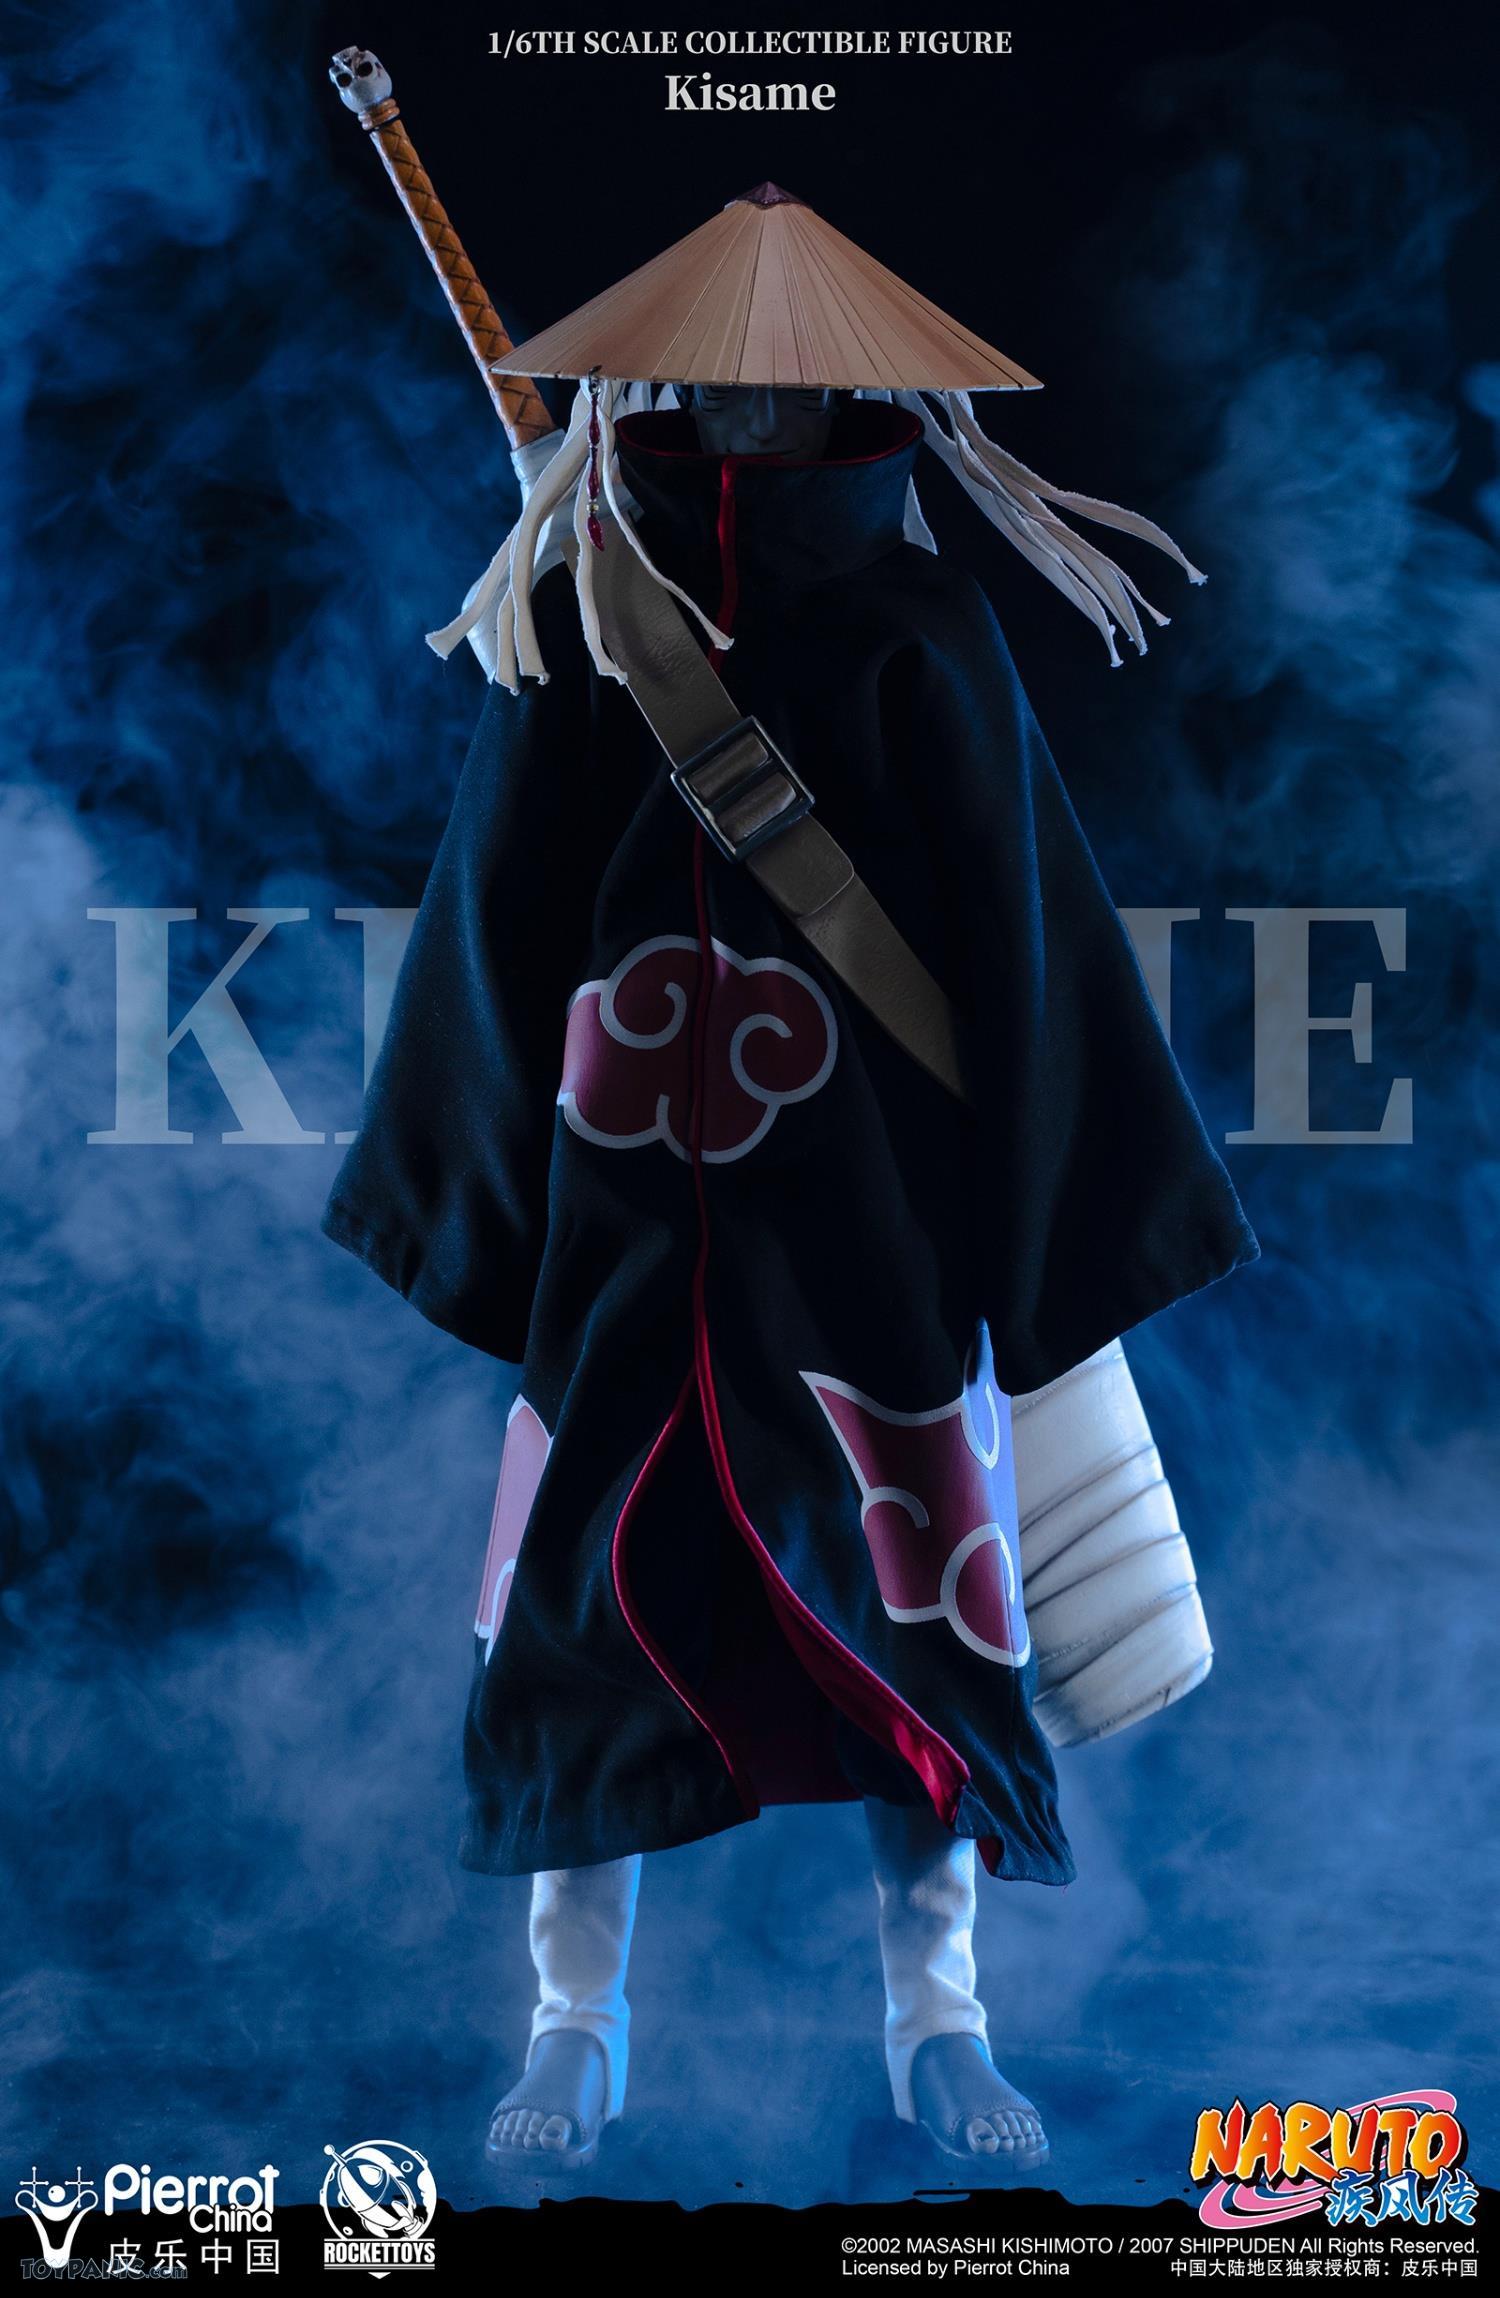 male - NEW PRODUCT: Rocket Toys ROC-007 1/6 Scale Kisame 221202460438PM_9230500